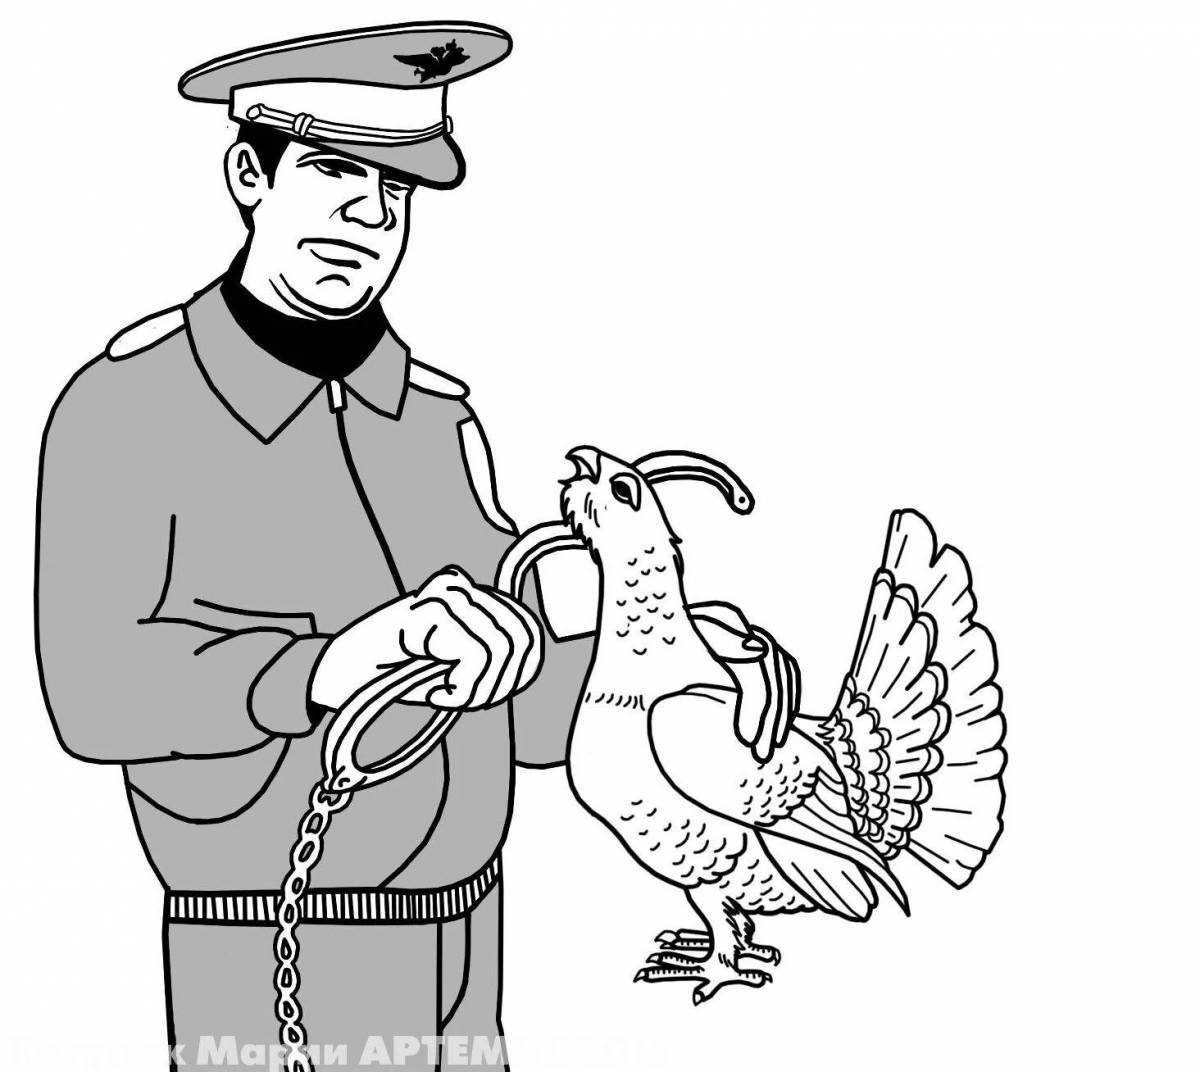 Adorable capercaillie coloring page for kids